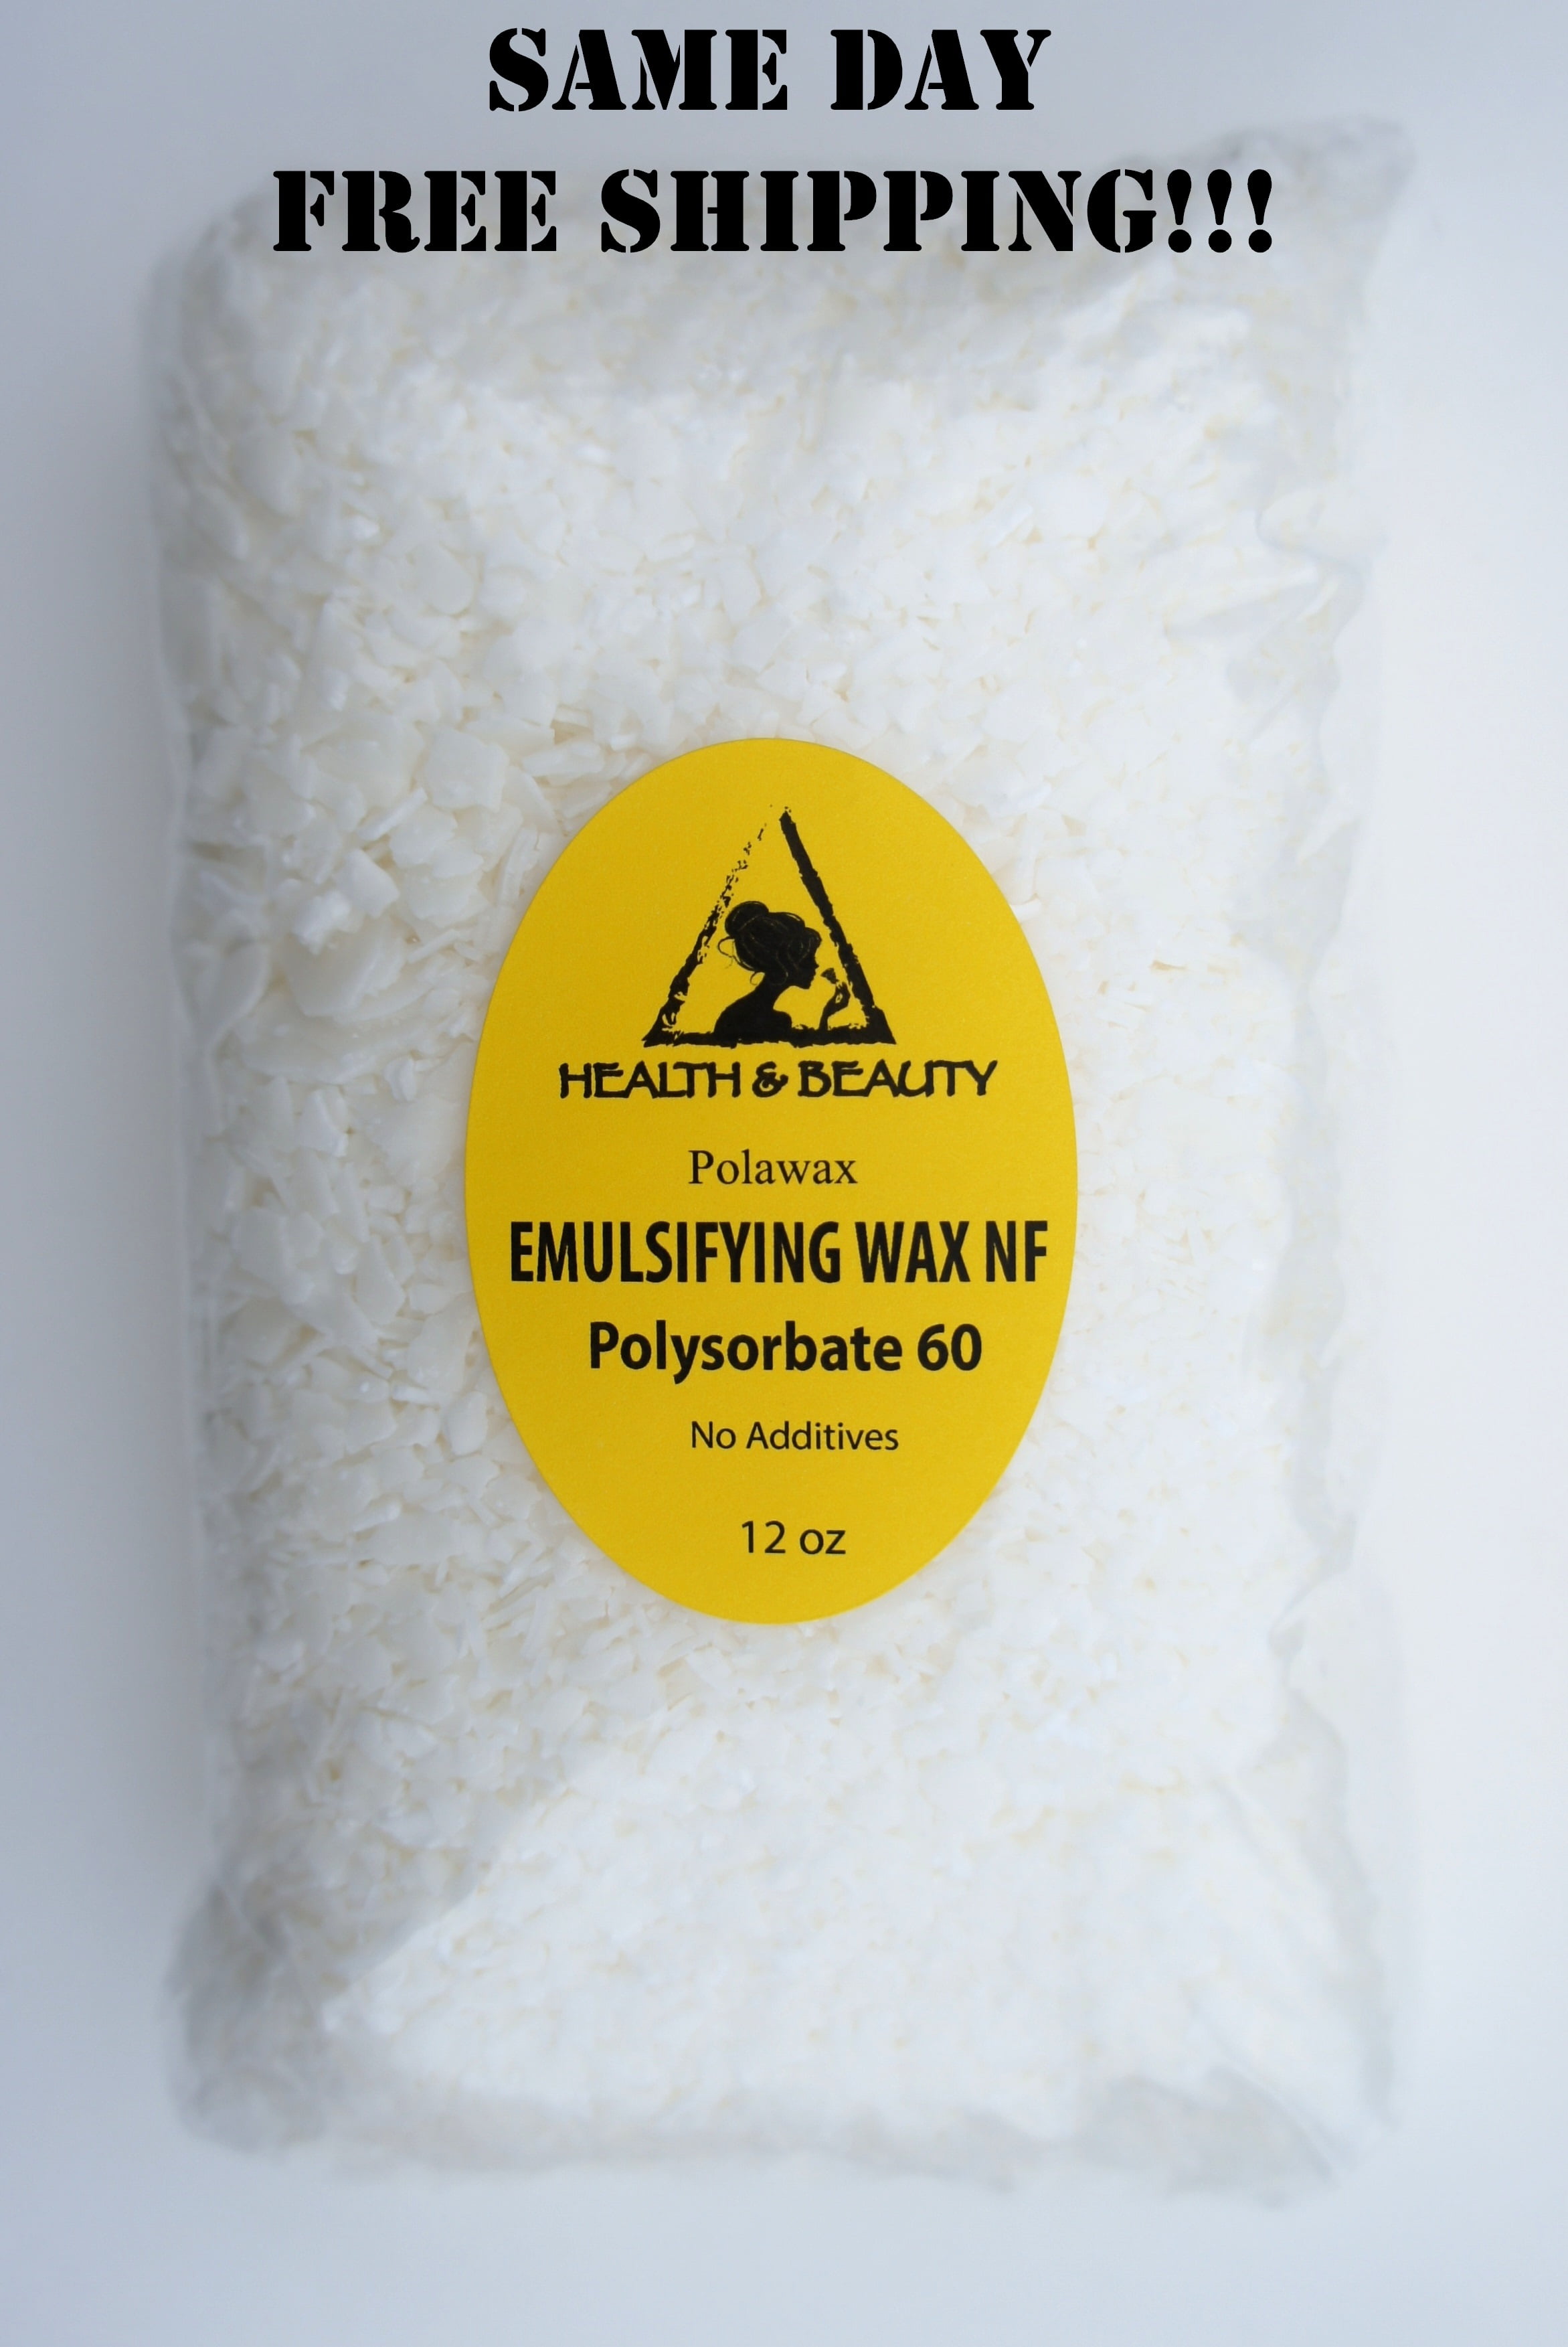 Emulsifying wax; what is it and why I don't recommend using it